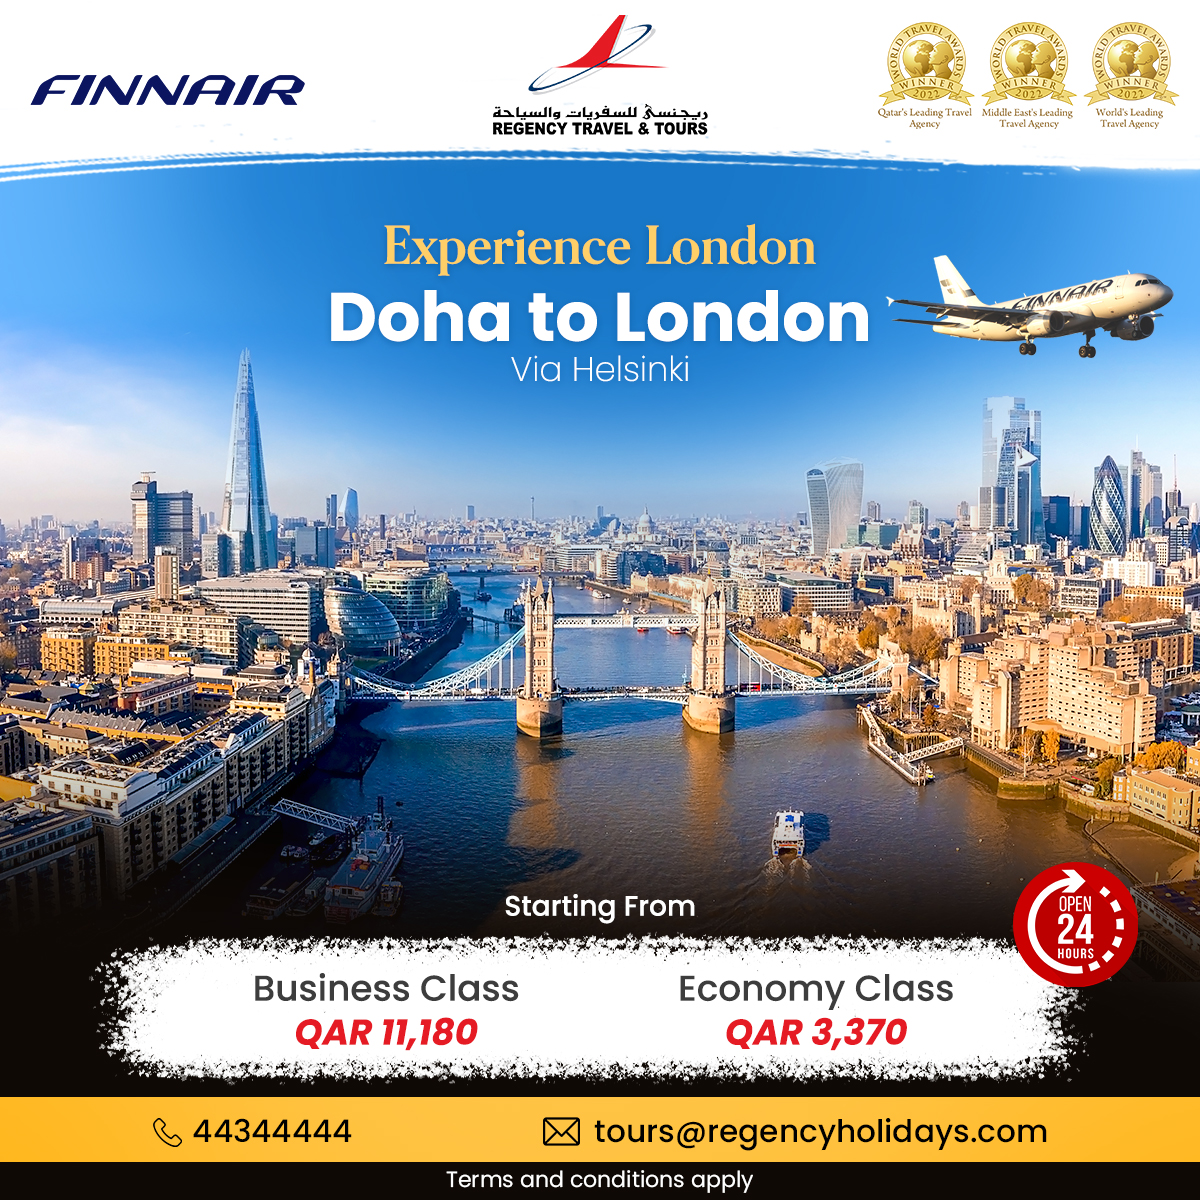 Cherish the world-class hospitality of Finnair Airlines while traveling from Doha to London via Helsinki. Have an amazing time experiencing all the luxurious and well-acclaimed services of this finest airline. 

Contact us for more info.

#finnair #traveltolondon #dohatolondon https://t.co/9kAsw7rc4n